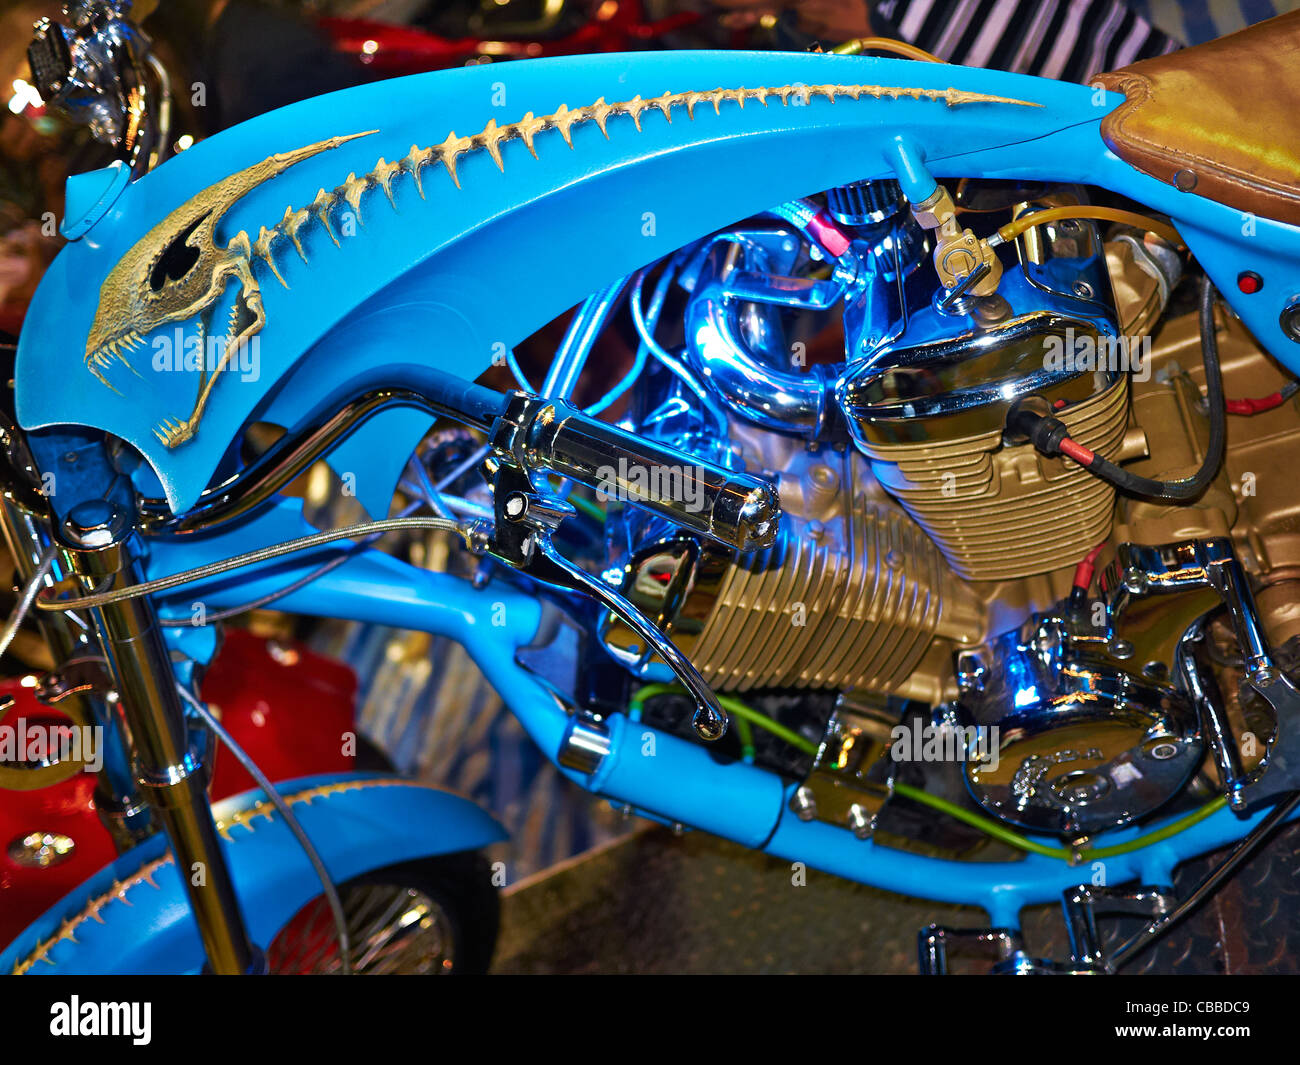 Customised Chopper motorcycle. Colorful and unusual fuel tank detail of a highly customized, award winning, Honda chopper motorcycle. Stock Photo